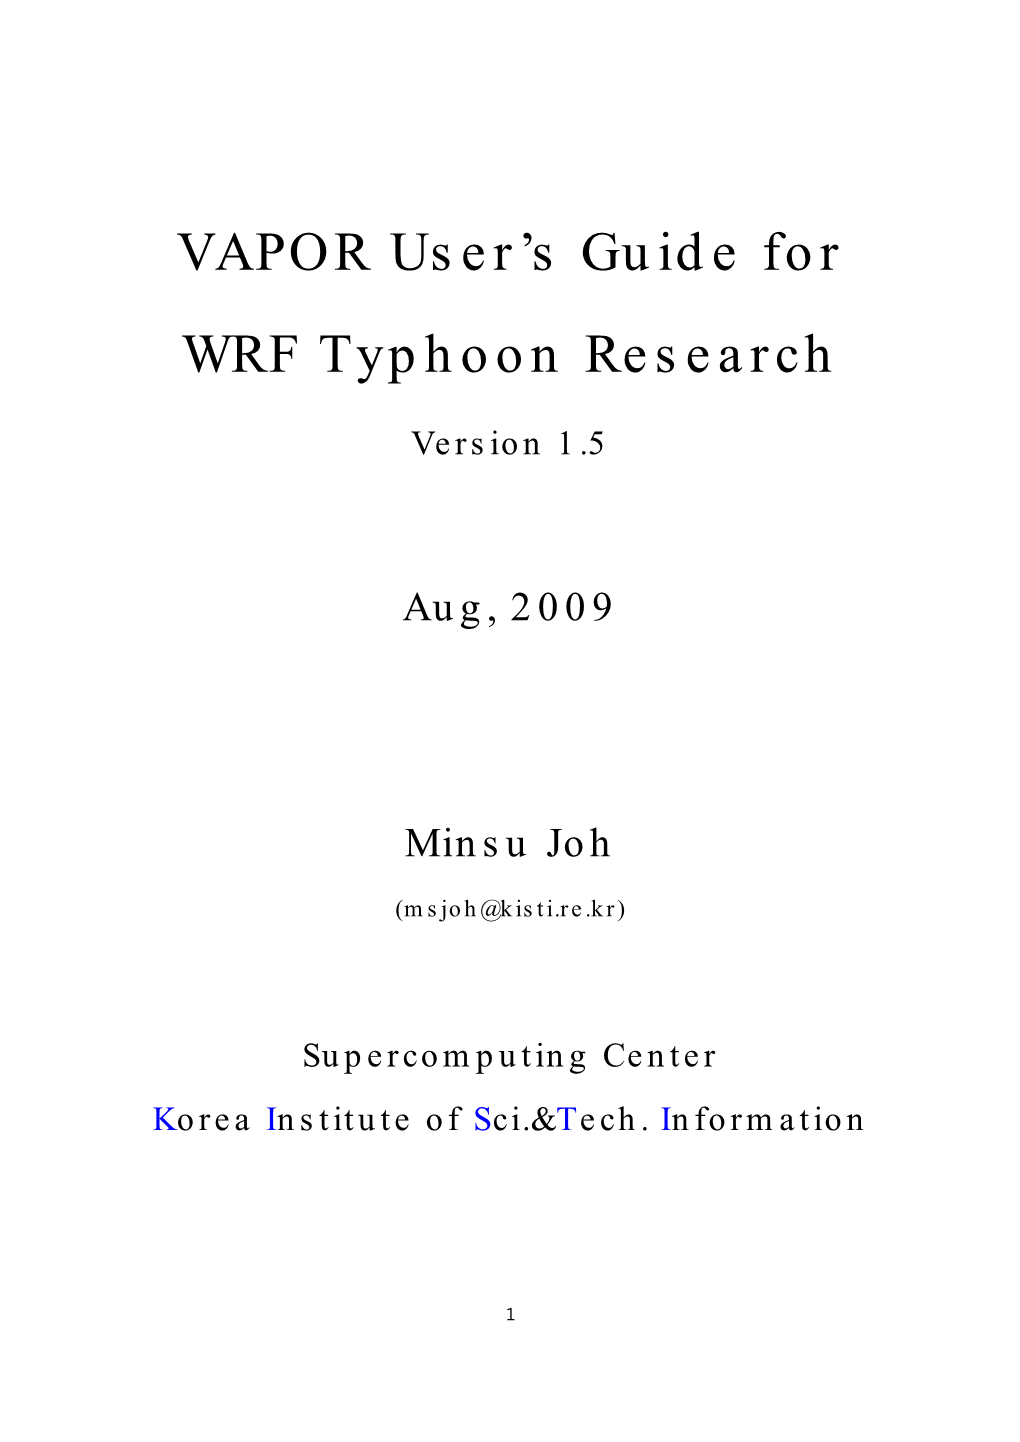 VAPOR User's Guide for WRF Typhoon Research